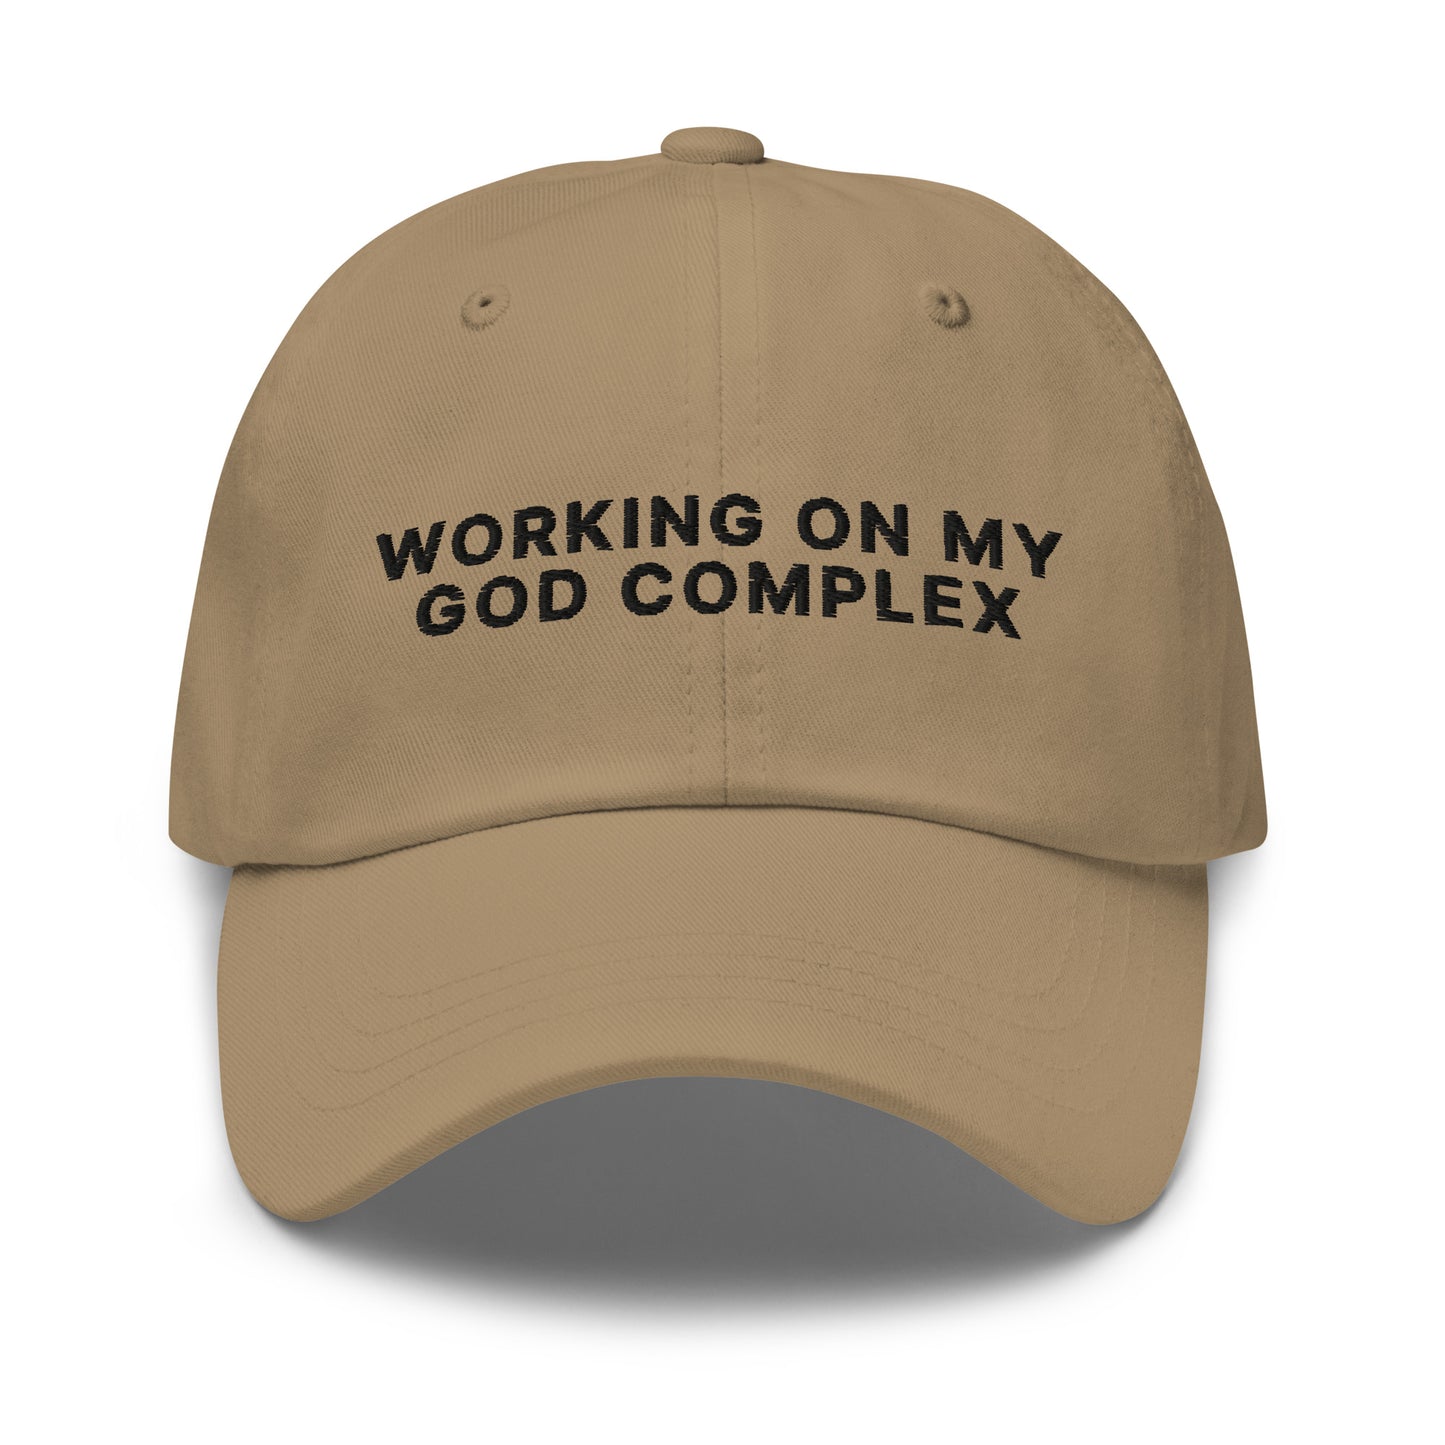 Working On My God Complex hat